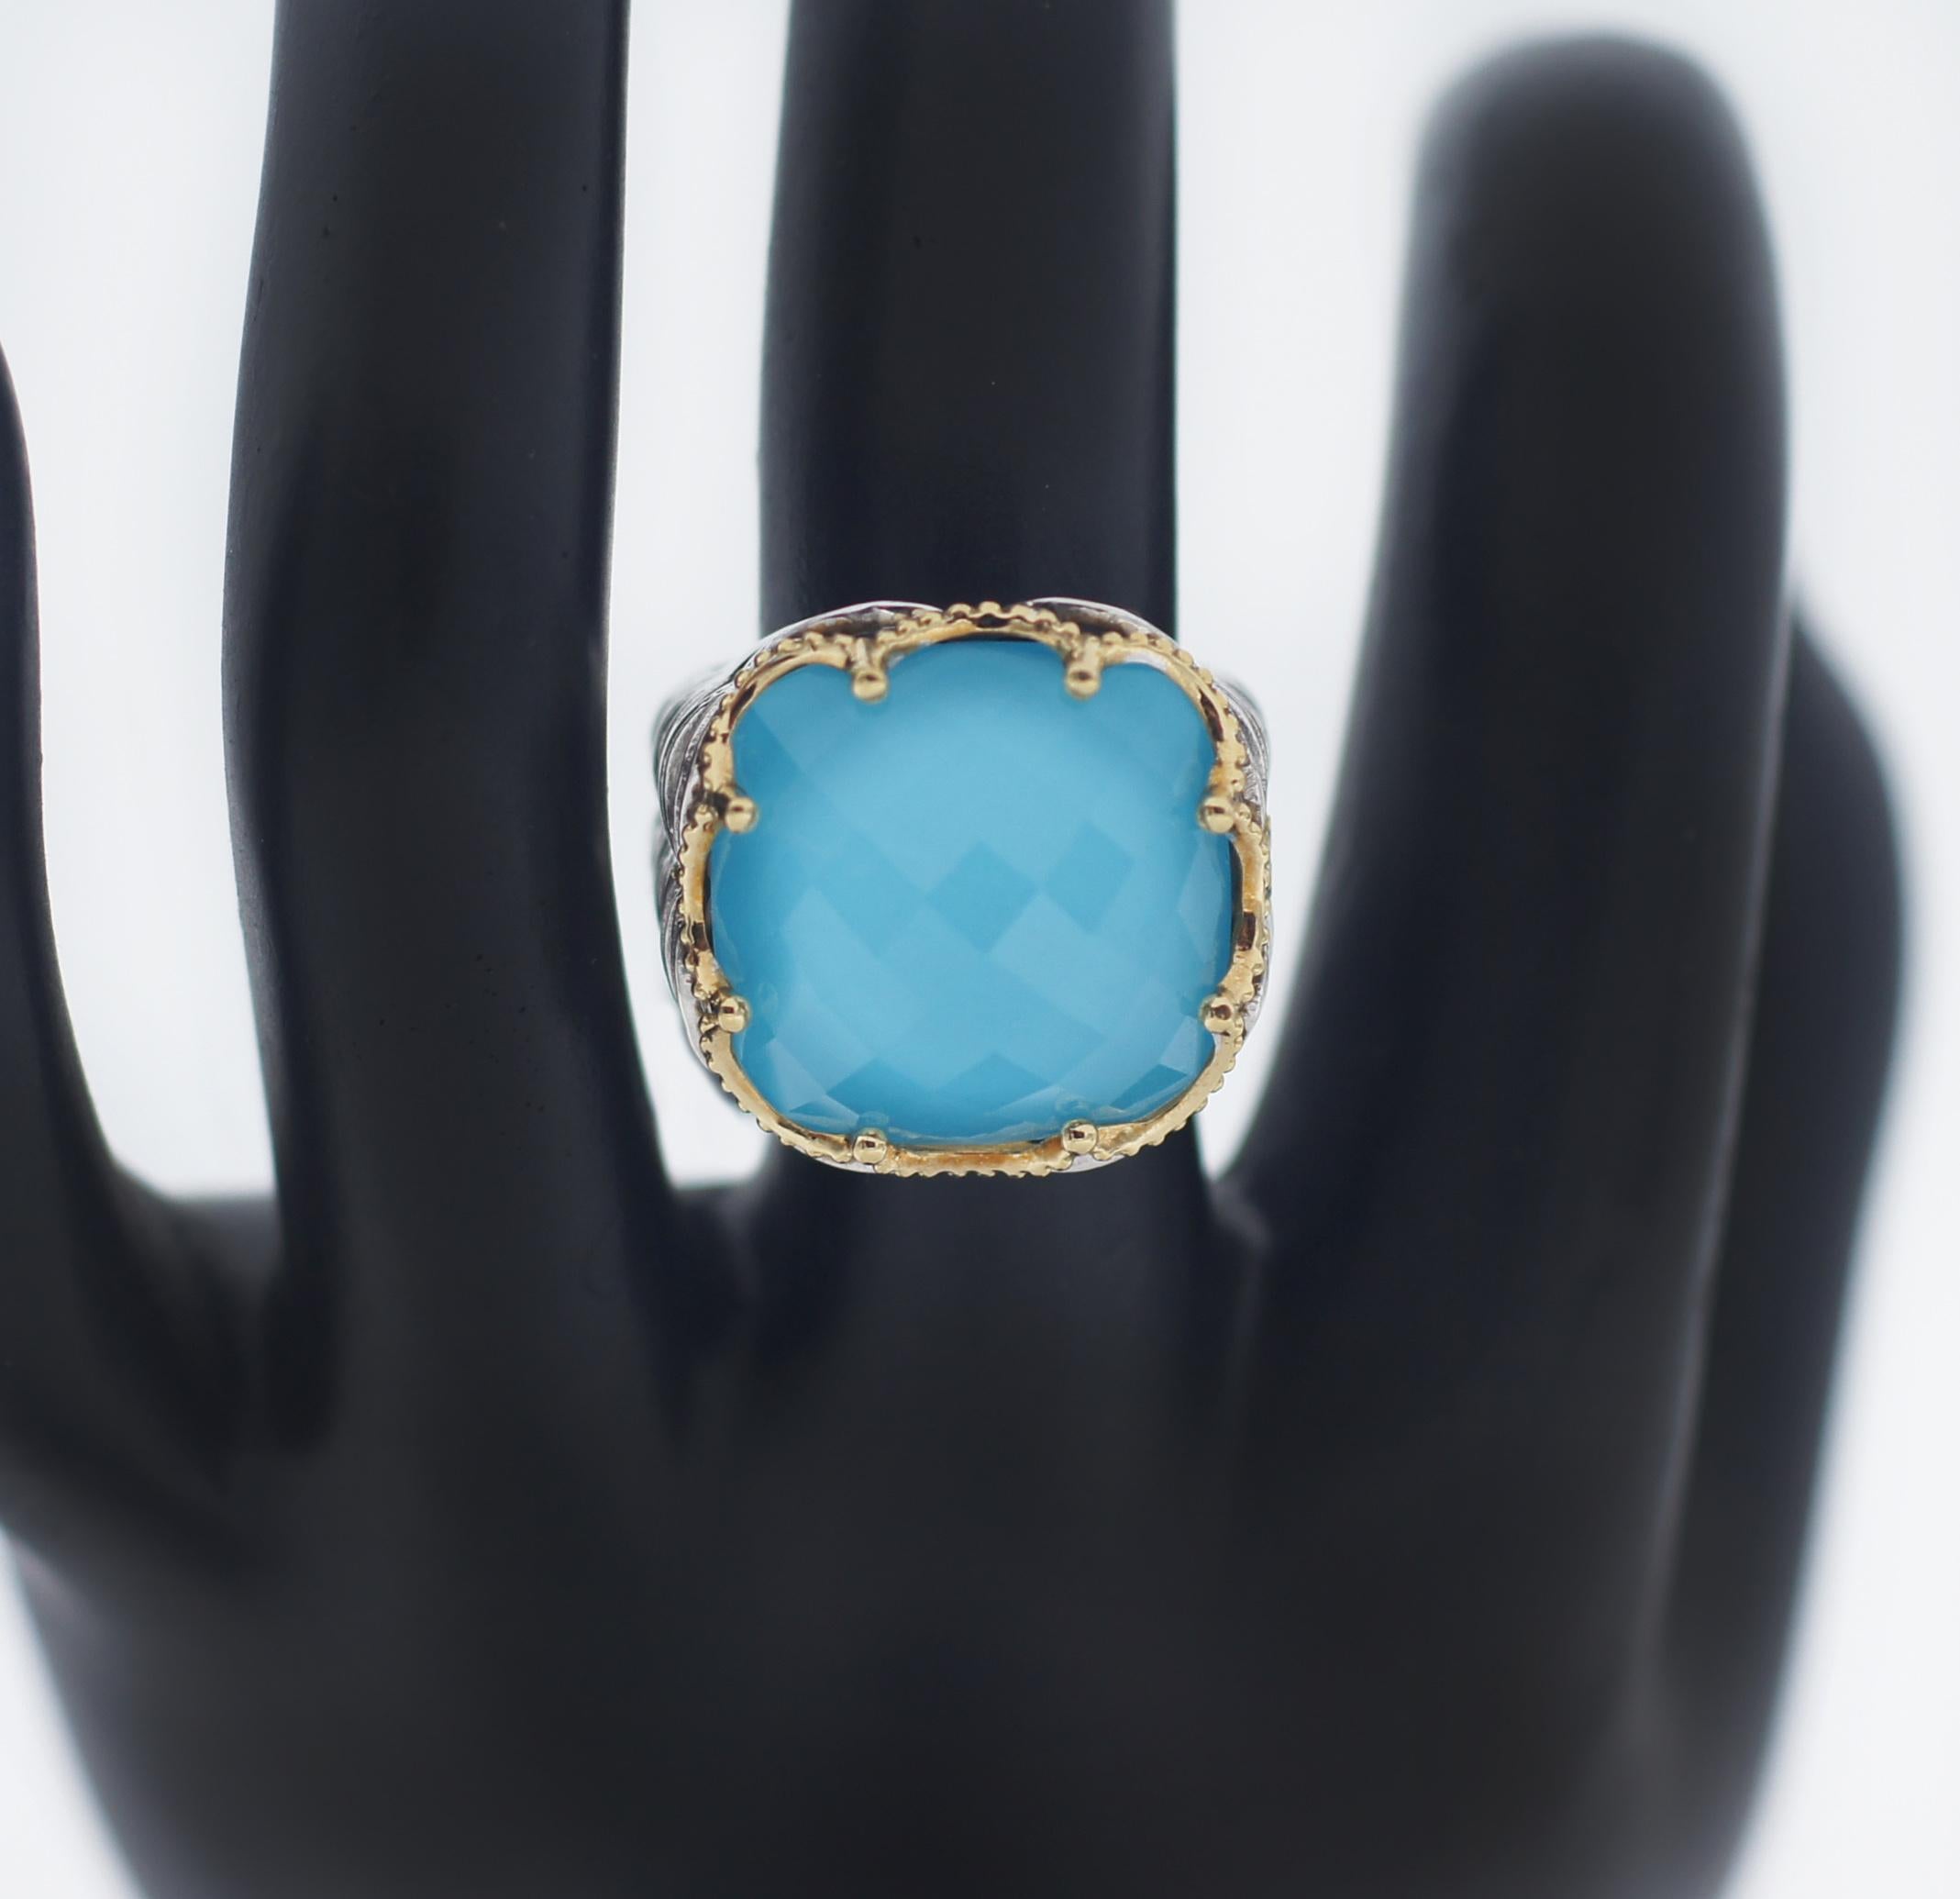 Tacori
925
18K
Crescent Crown Gem
Neolite Turquoise
Size 7.5
This beautiful pre-loved ring is in great looking condition. This ring has some wear which is consistent with time and light use. It has been cleaned and is ready for its new owner.
See